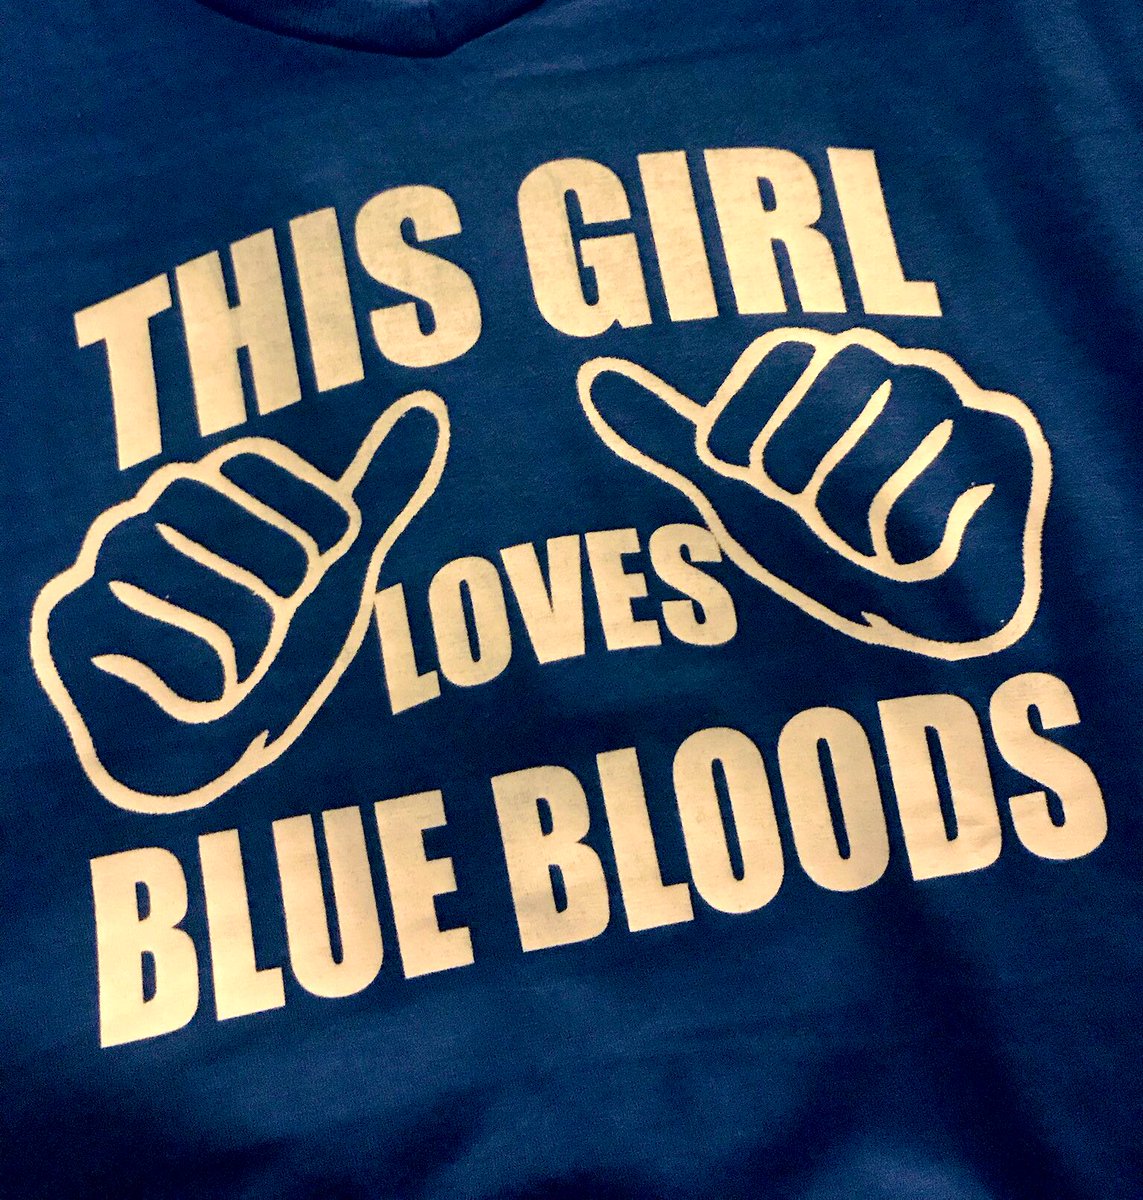 Can’t imagine Friday night without #BlueBloods and my favorite detective 💙💙 Let’s tweet and #SaveBlueBloods 💙 @SaveBlueBloods @DonnieWahlberg @BlueBloods_CBS